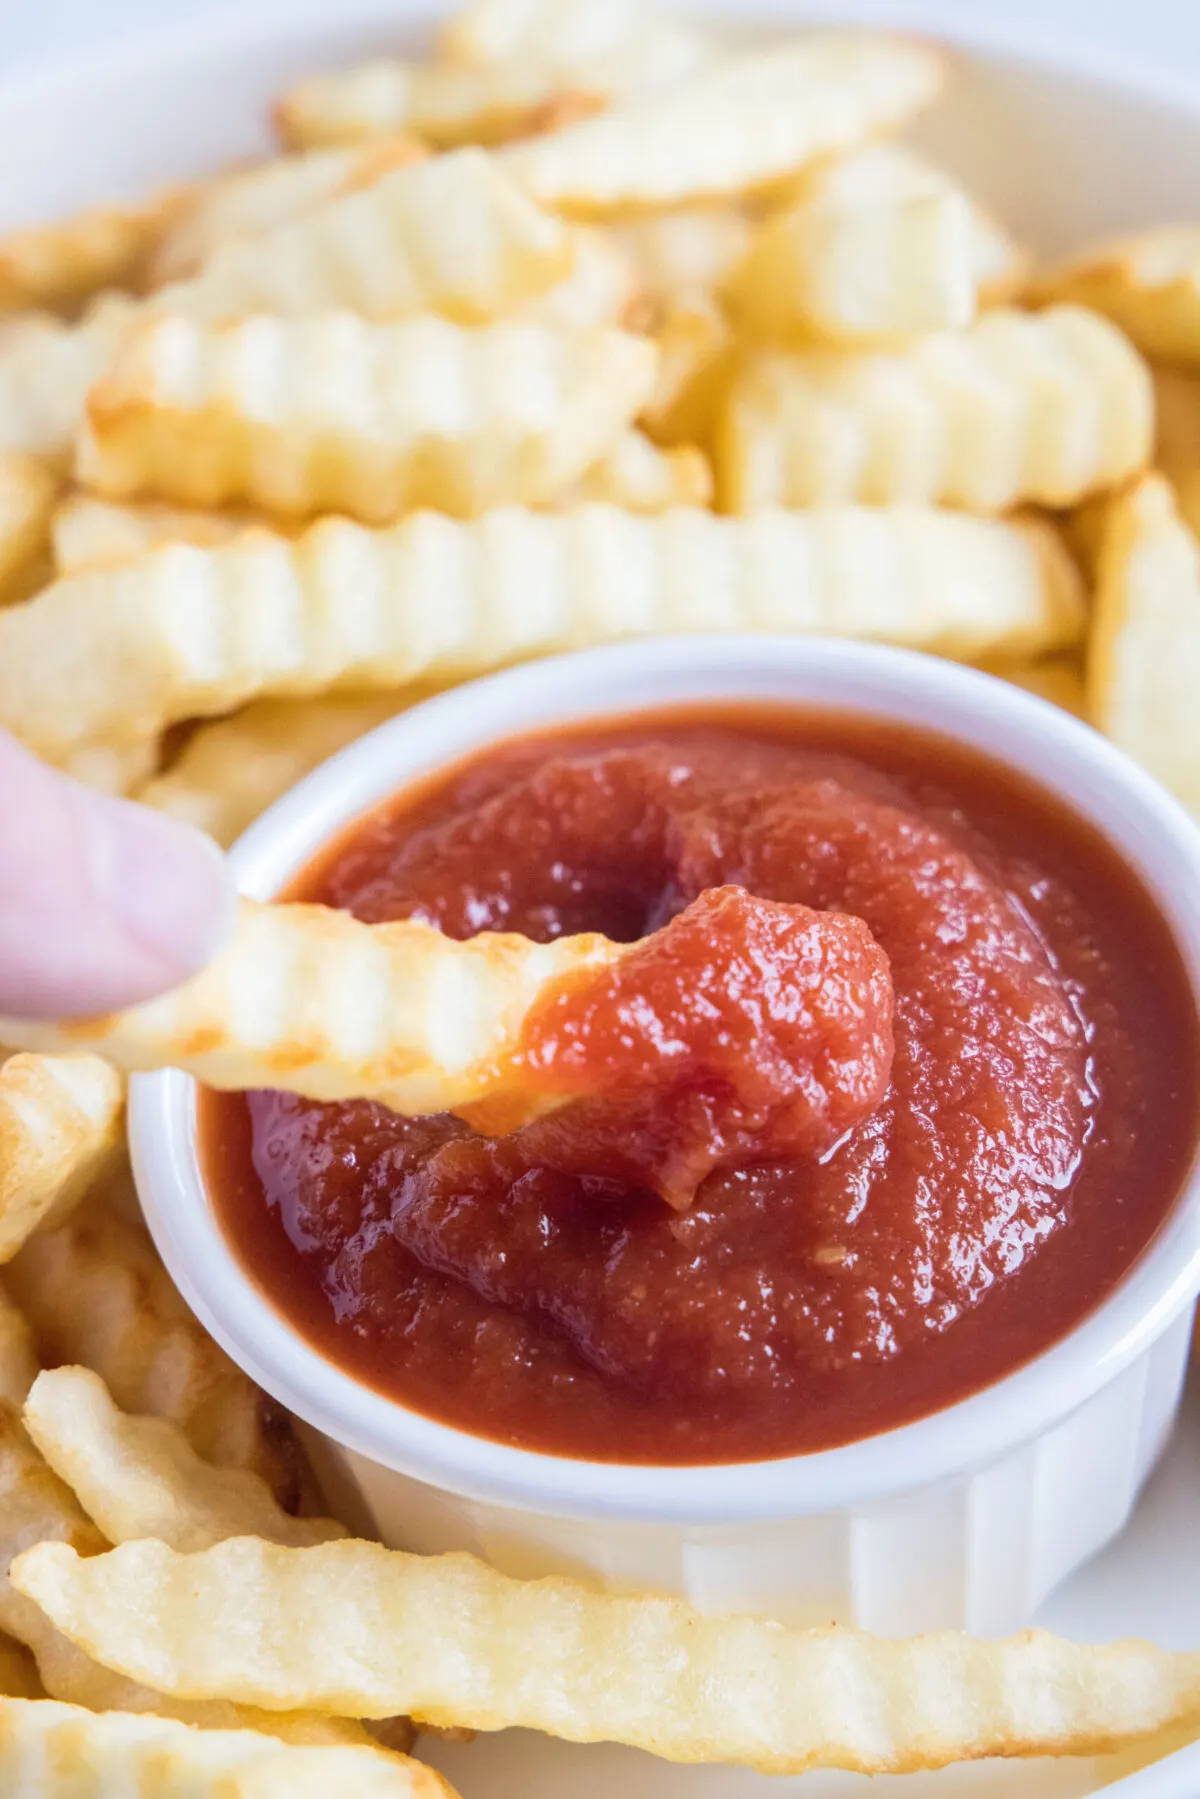 A hand dipping a fry into a ramekin of ketchup, surrounded by more fries